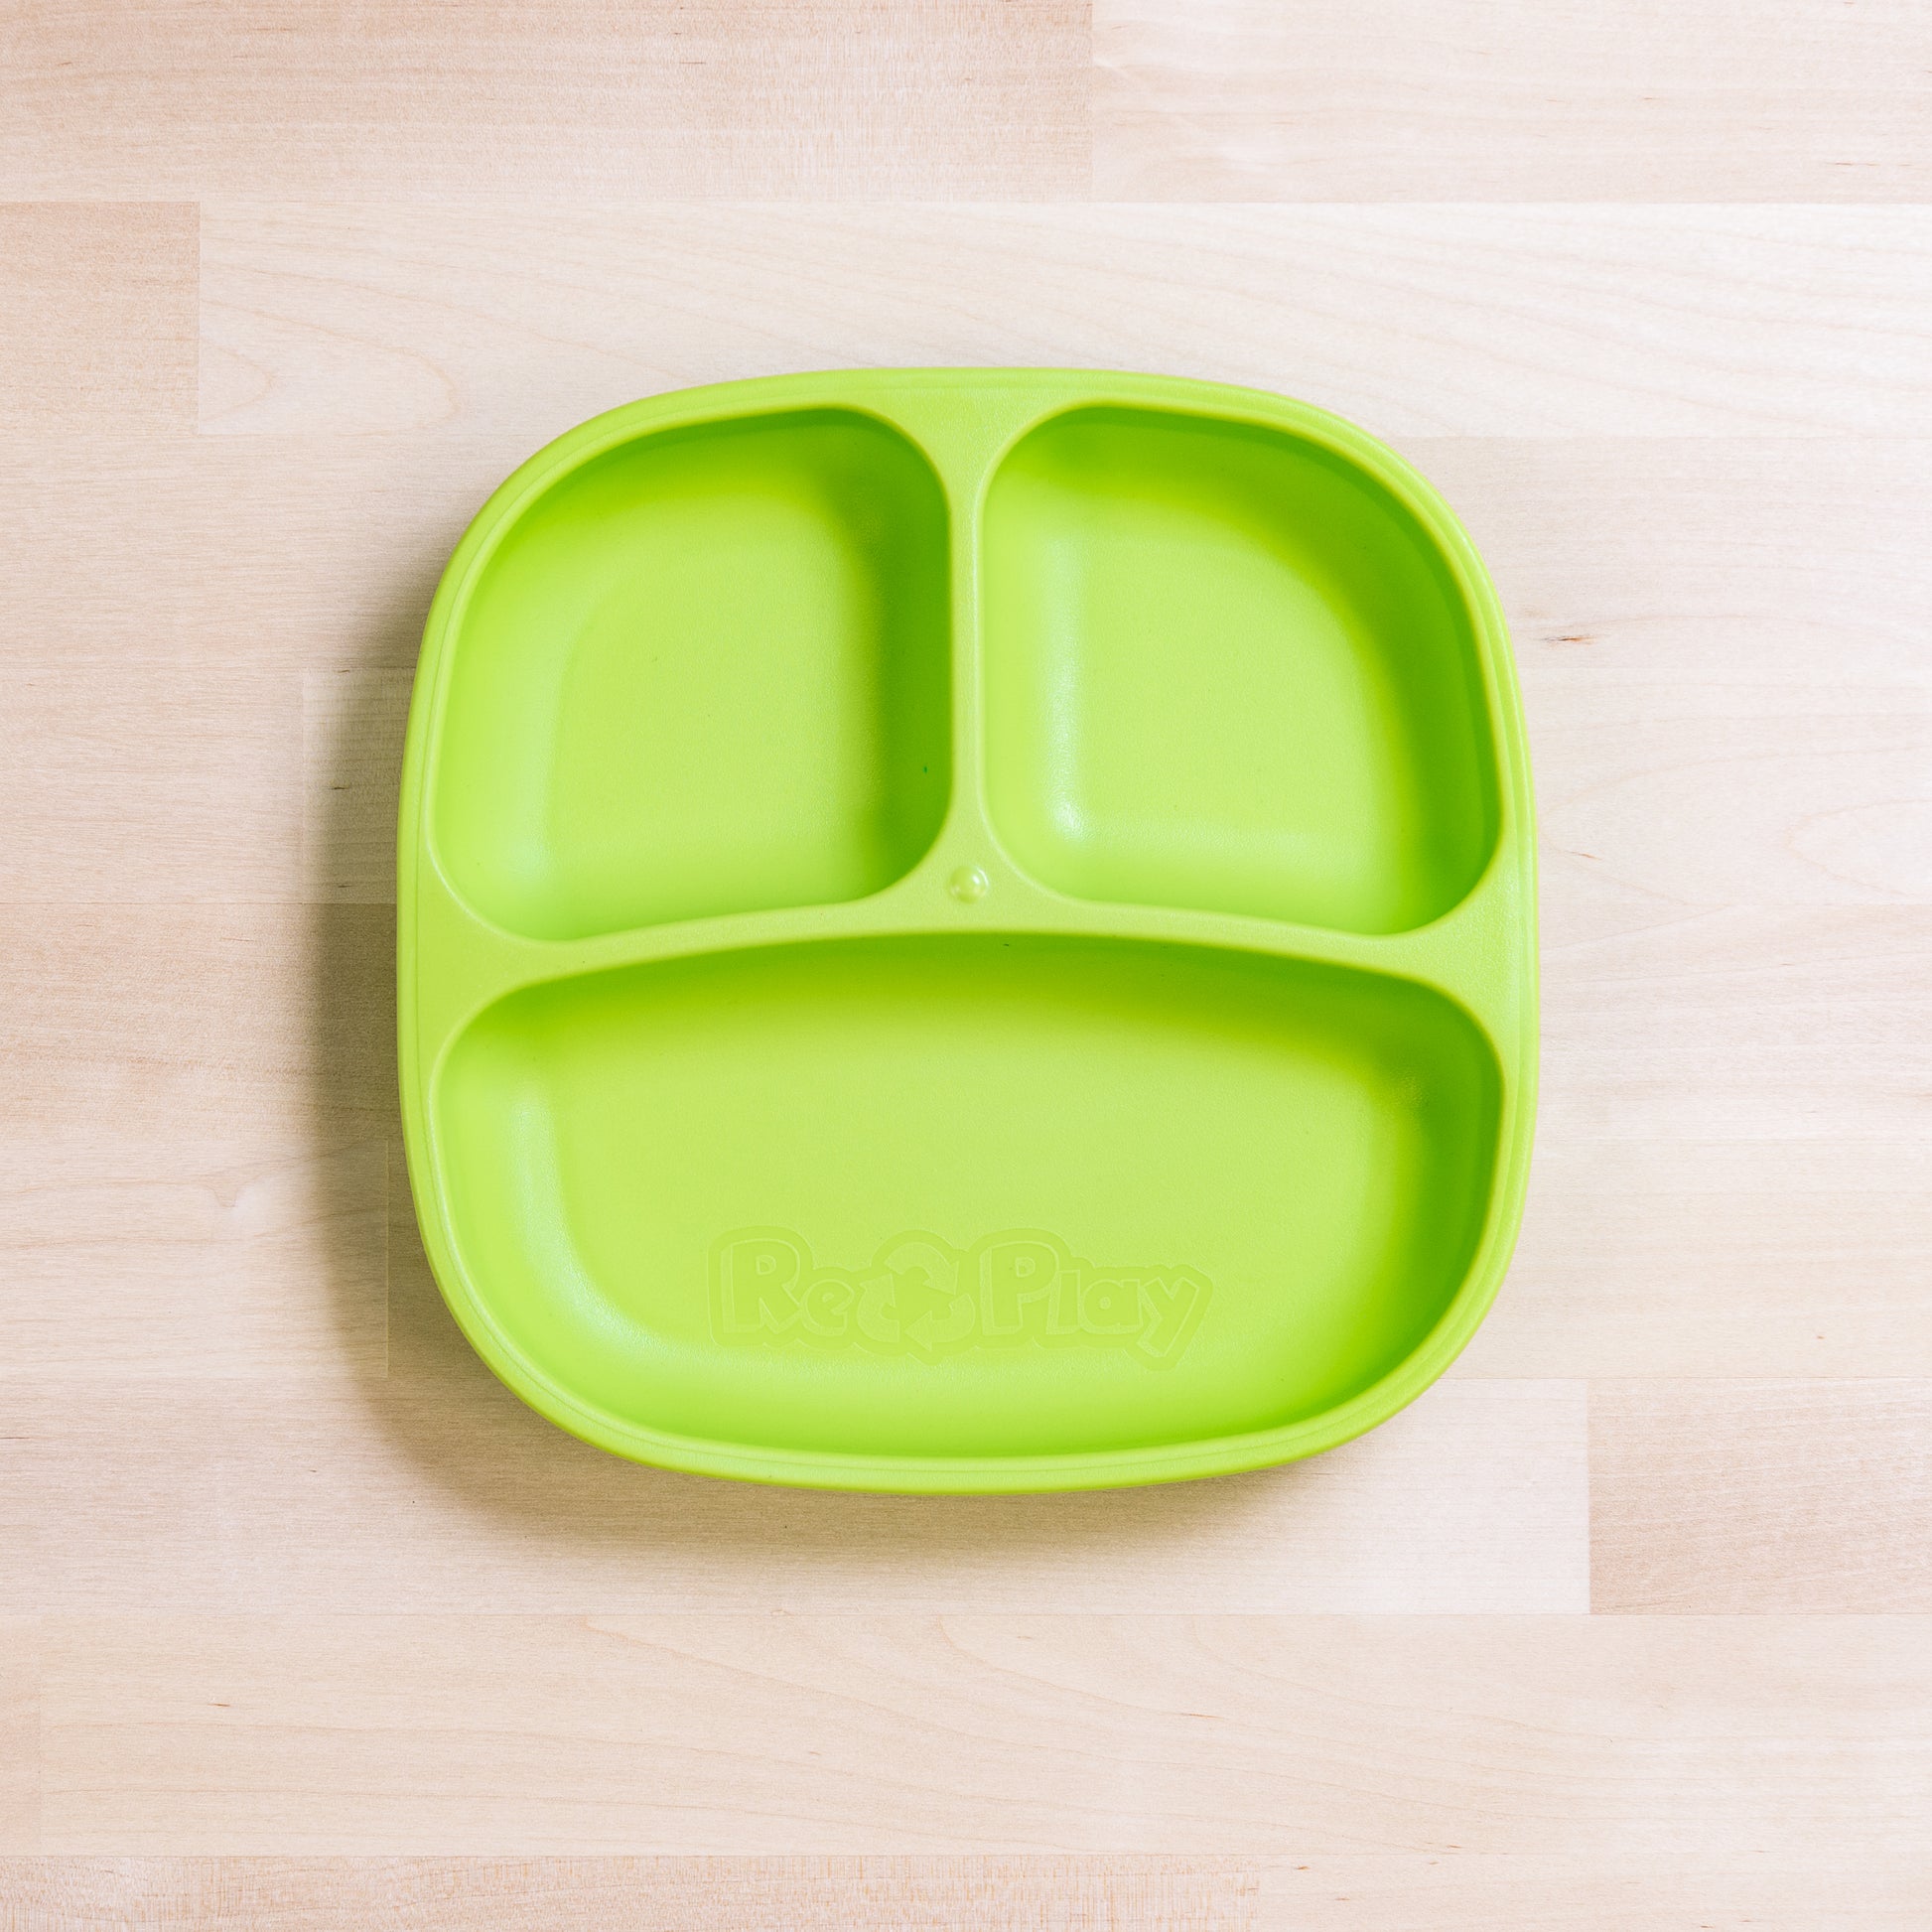 Re-Play Divided Plate 7" plate in Lime Green from Bear & Moo